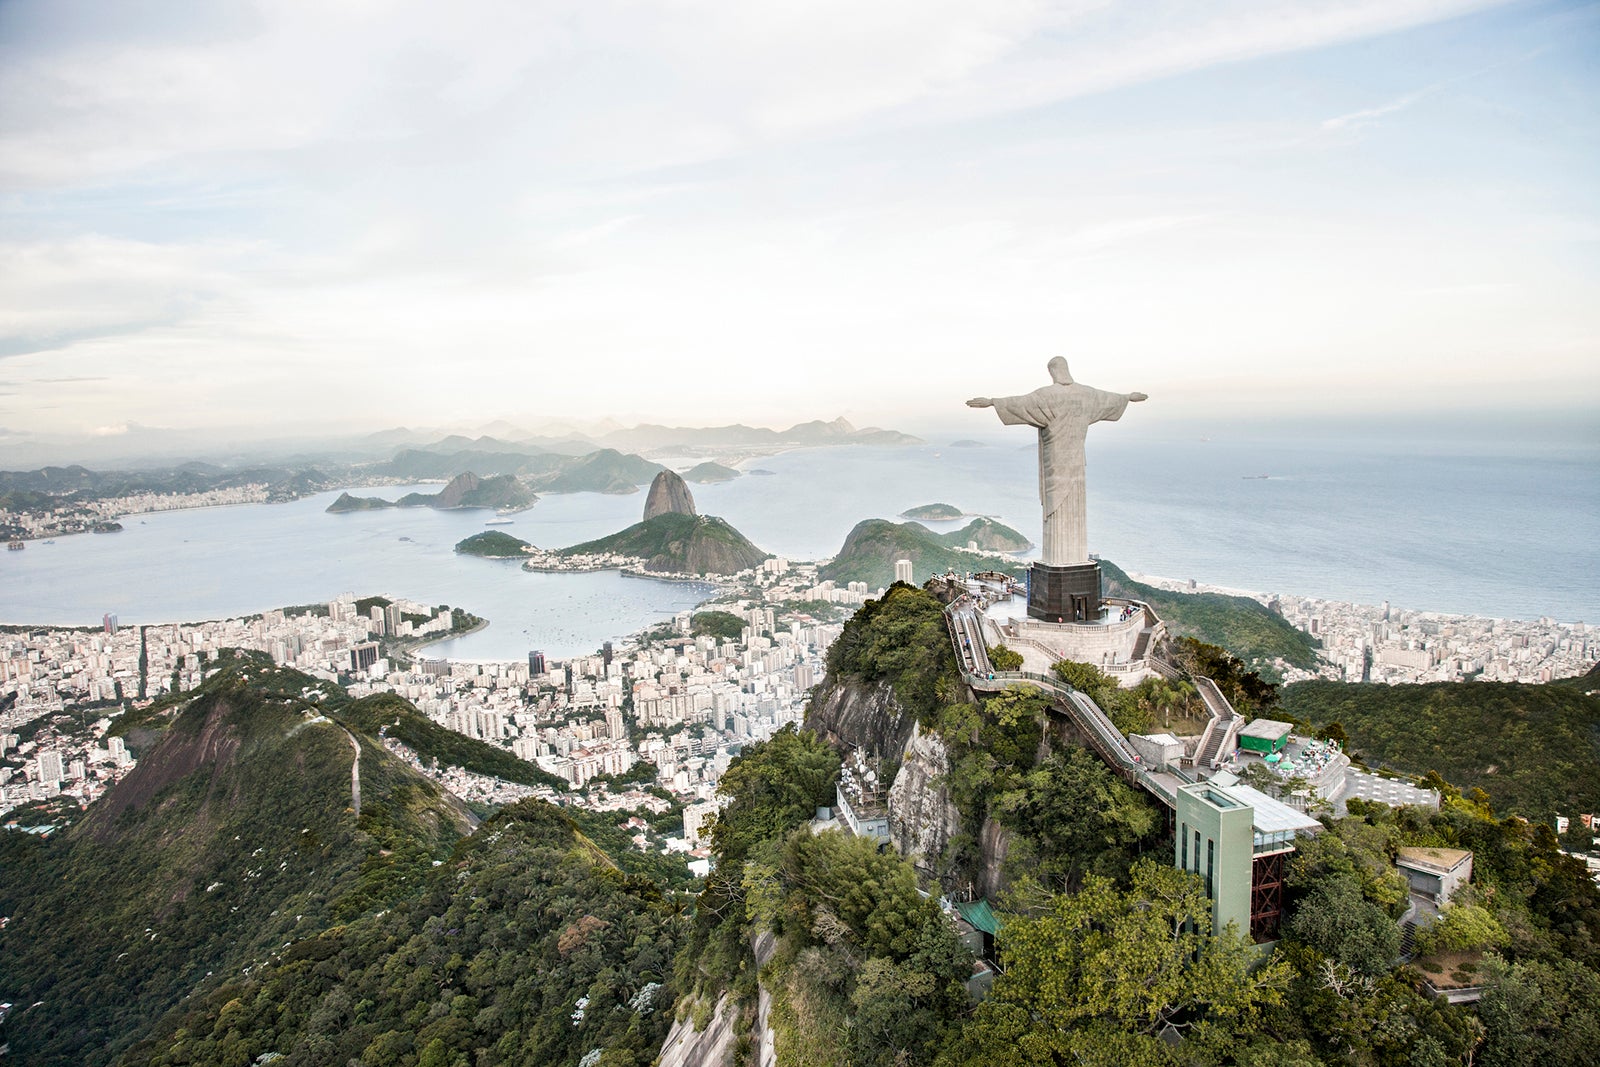 fly business class to rio de janeiro from miami and washington, dc, from $1,563